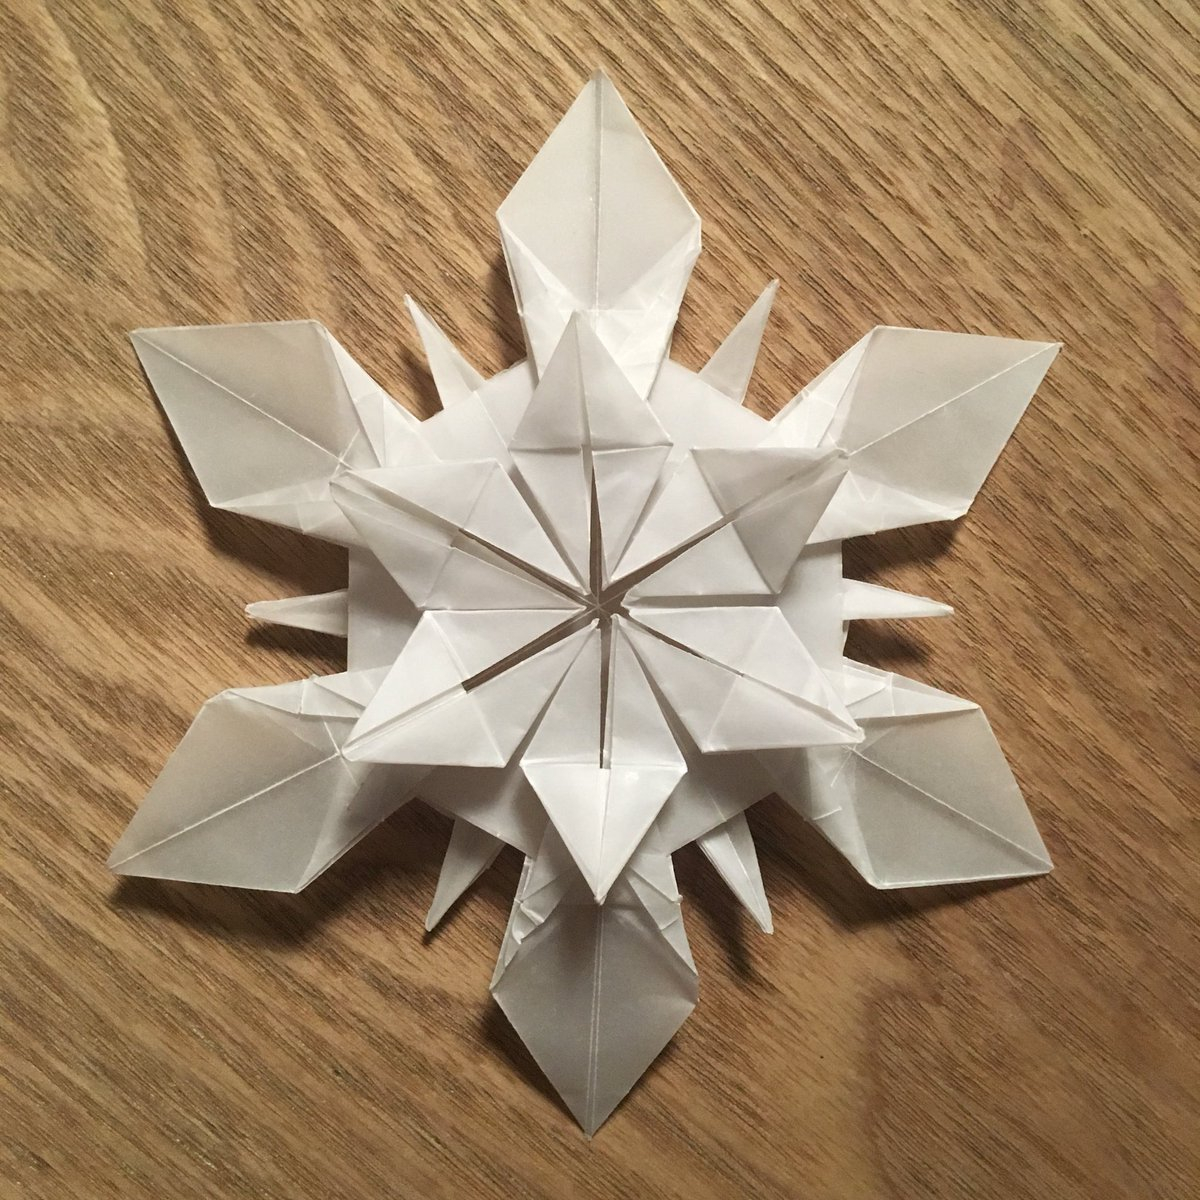 Printer Paper Origami Clarissa Grandi On Twitter You Could Steal Some Paper From The